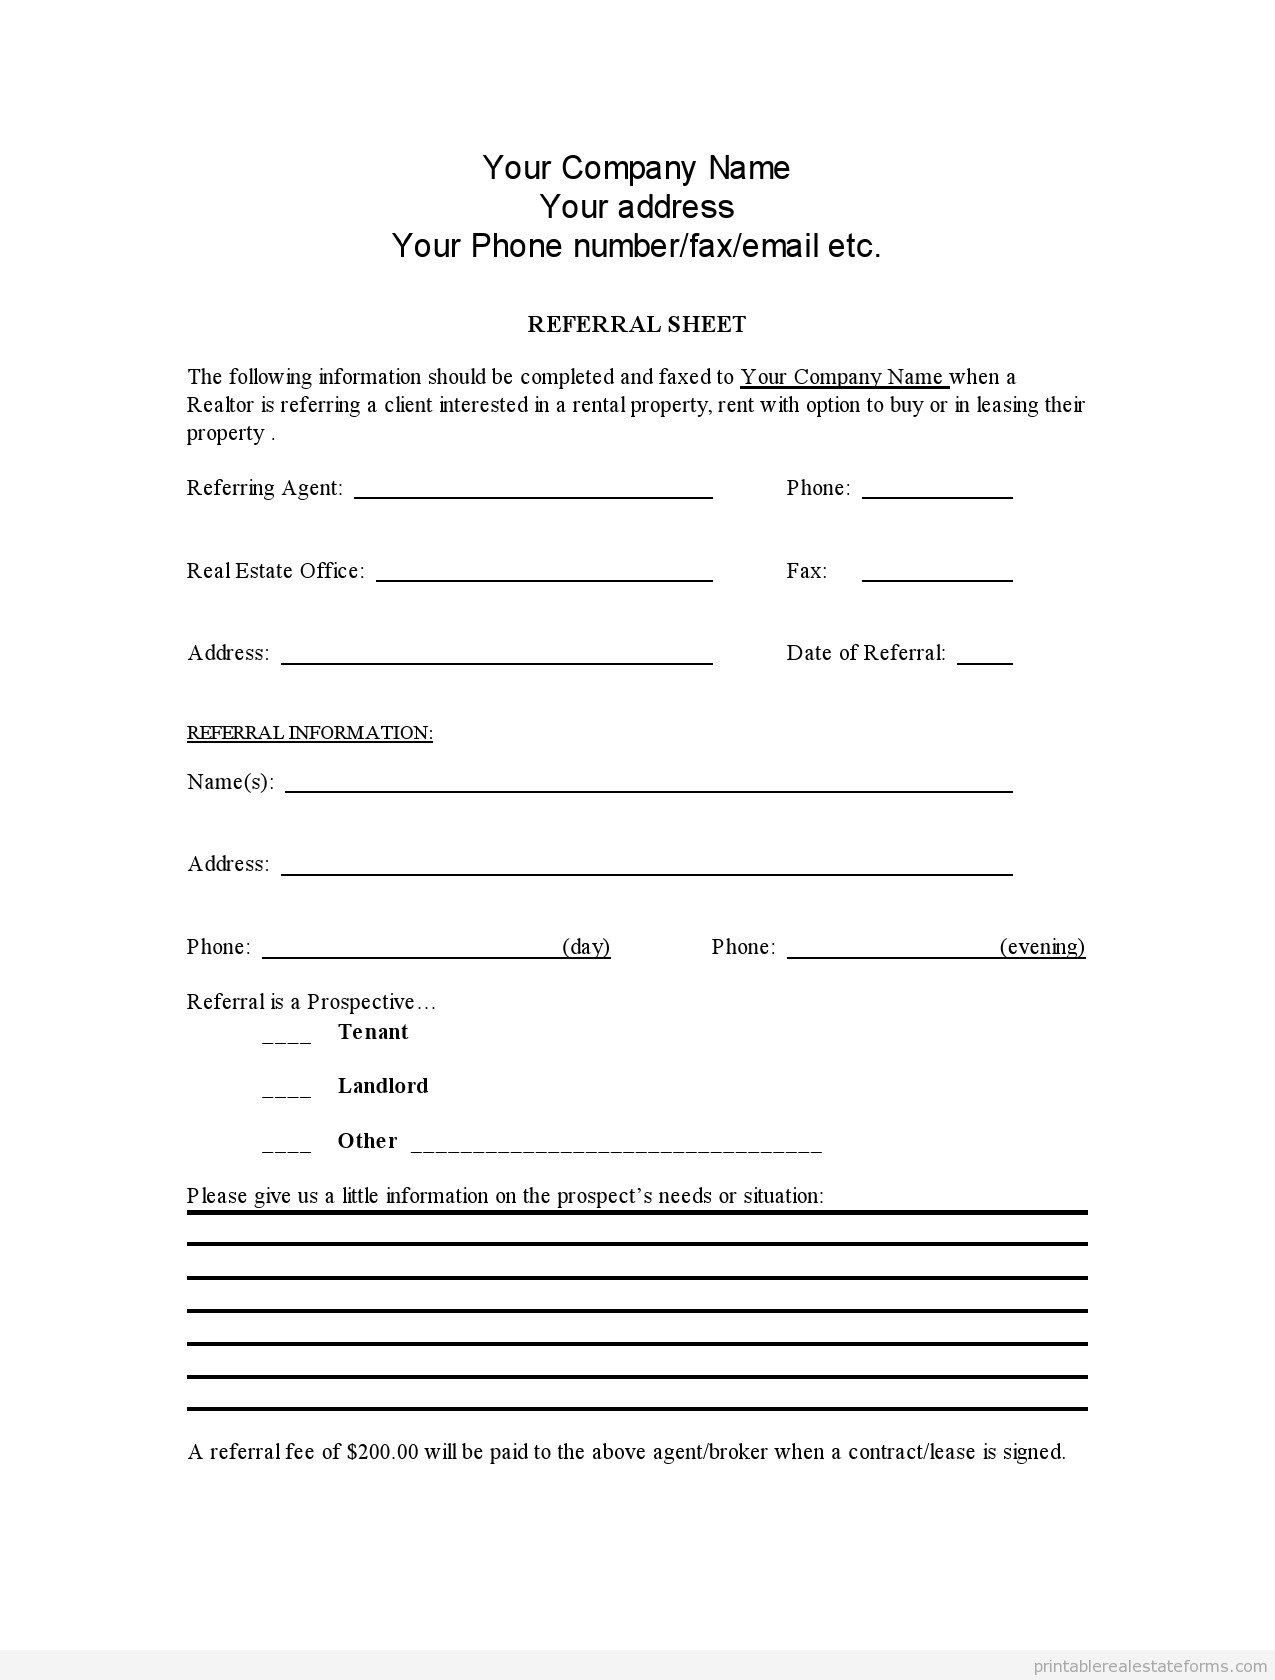 Real Estate Referral form Free Printable Real Estate Referral form Template Pdf